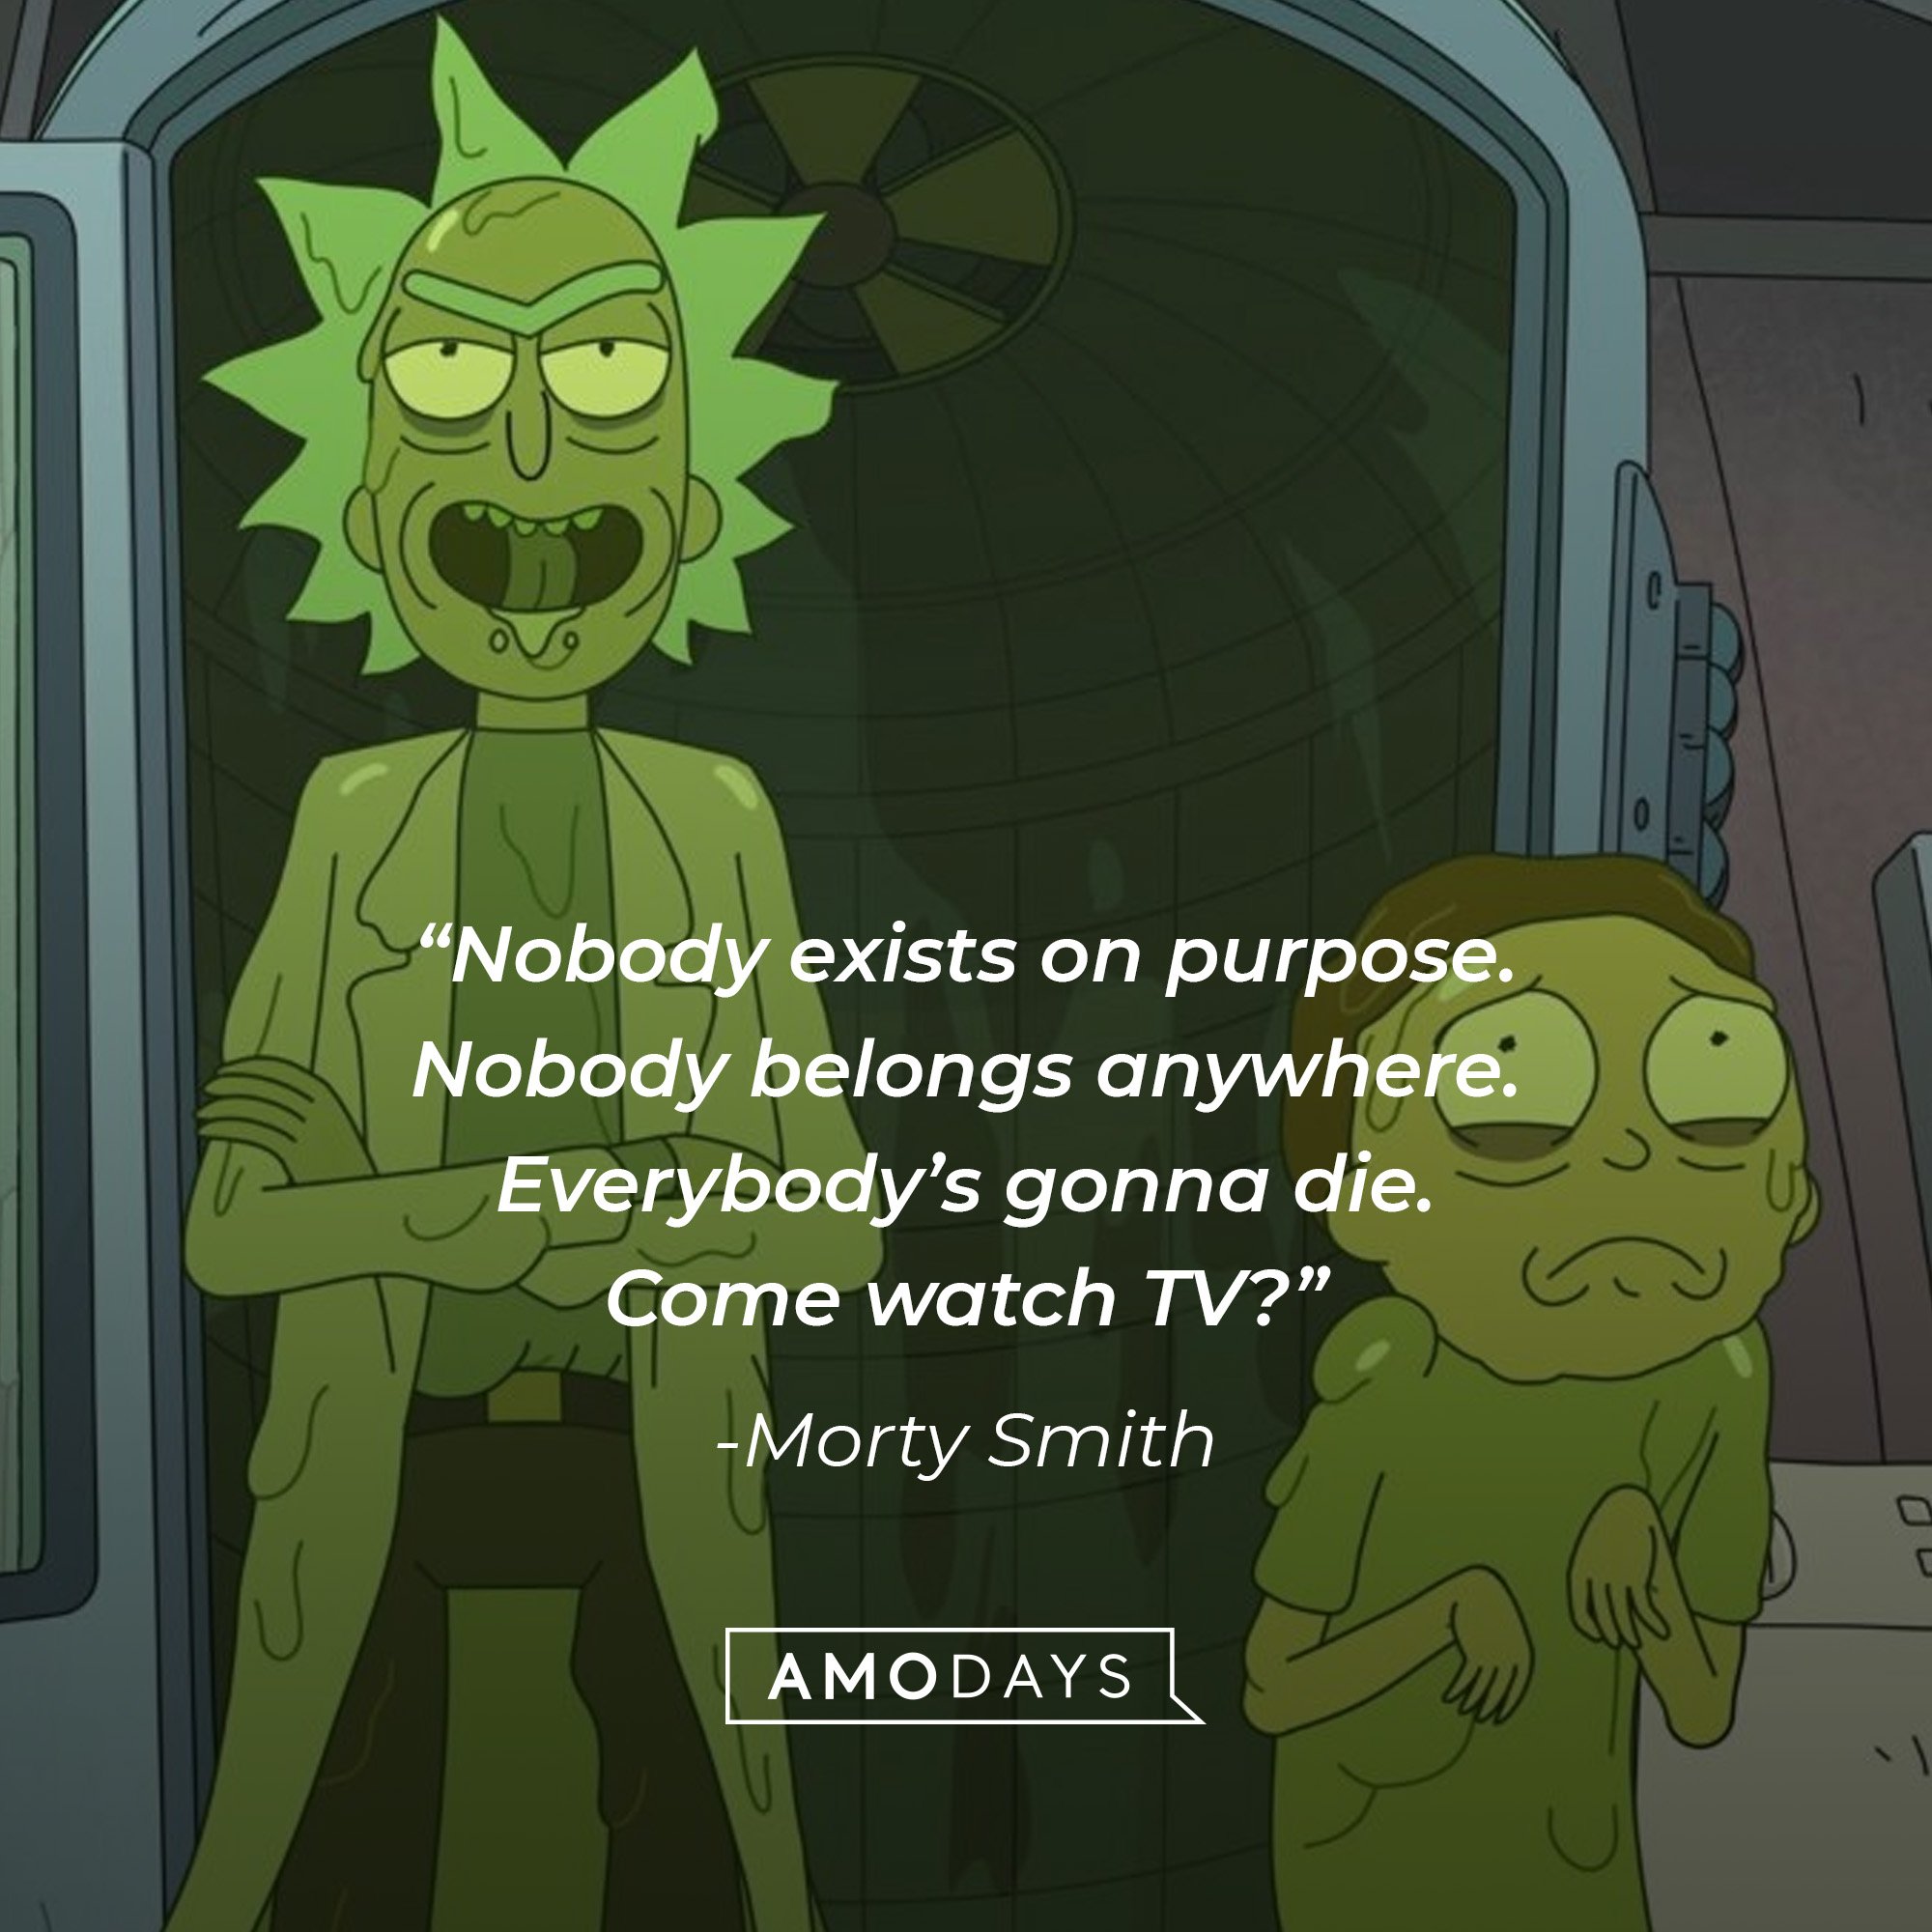 Morty Smith’s quote: “Nobody exists on purpose. Nobody belongs anywhere. Everybody’s gonna die. Come watch TV?” | Image: AmoDays